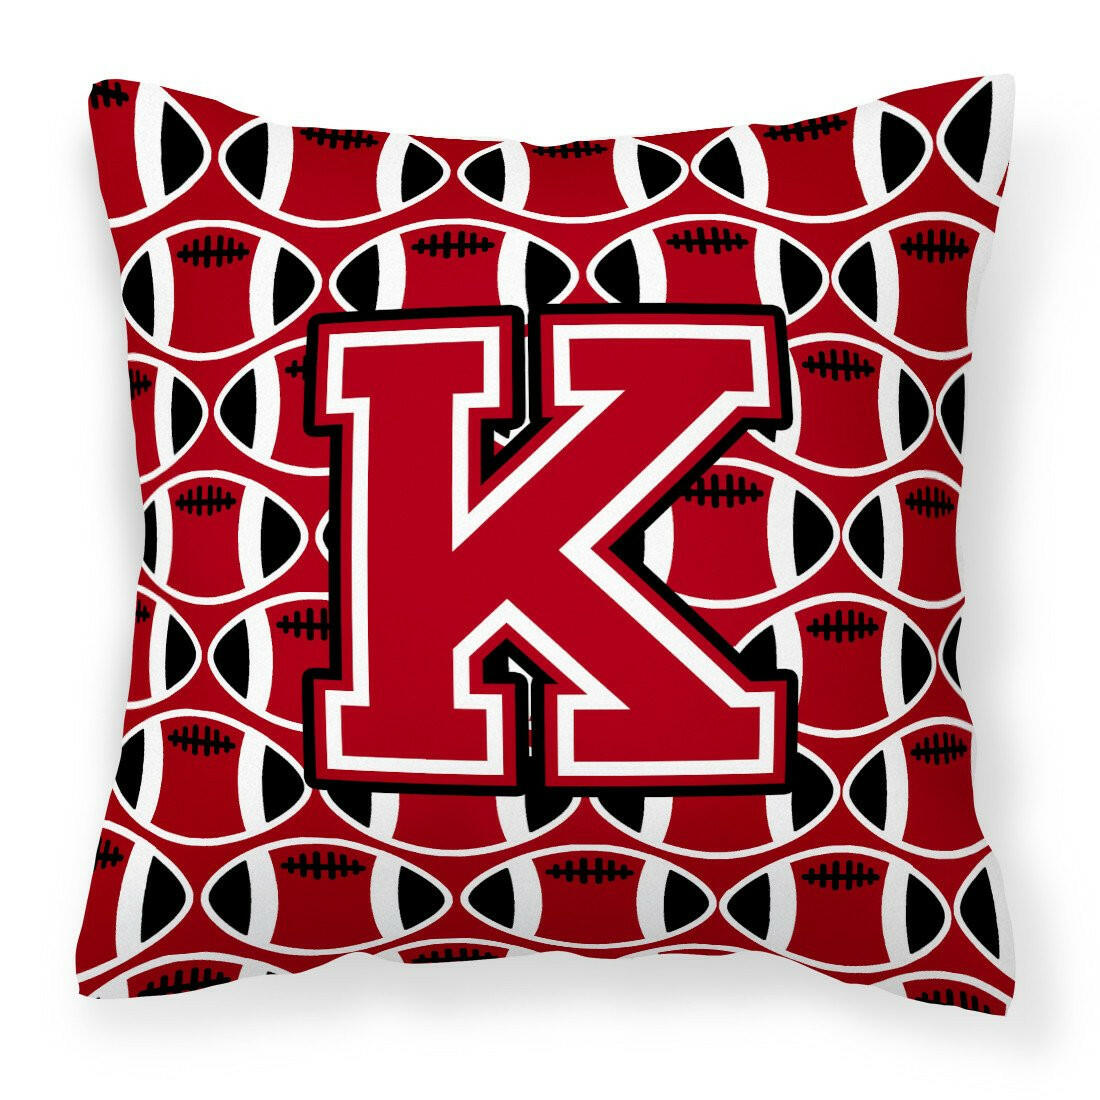 Letter K Football Red, Black and White Fabric Decorative Pillow CJ1073-KPW1414 by Caroline's Treasures